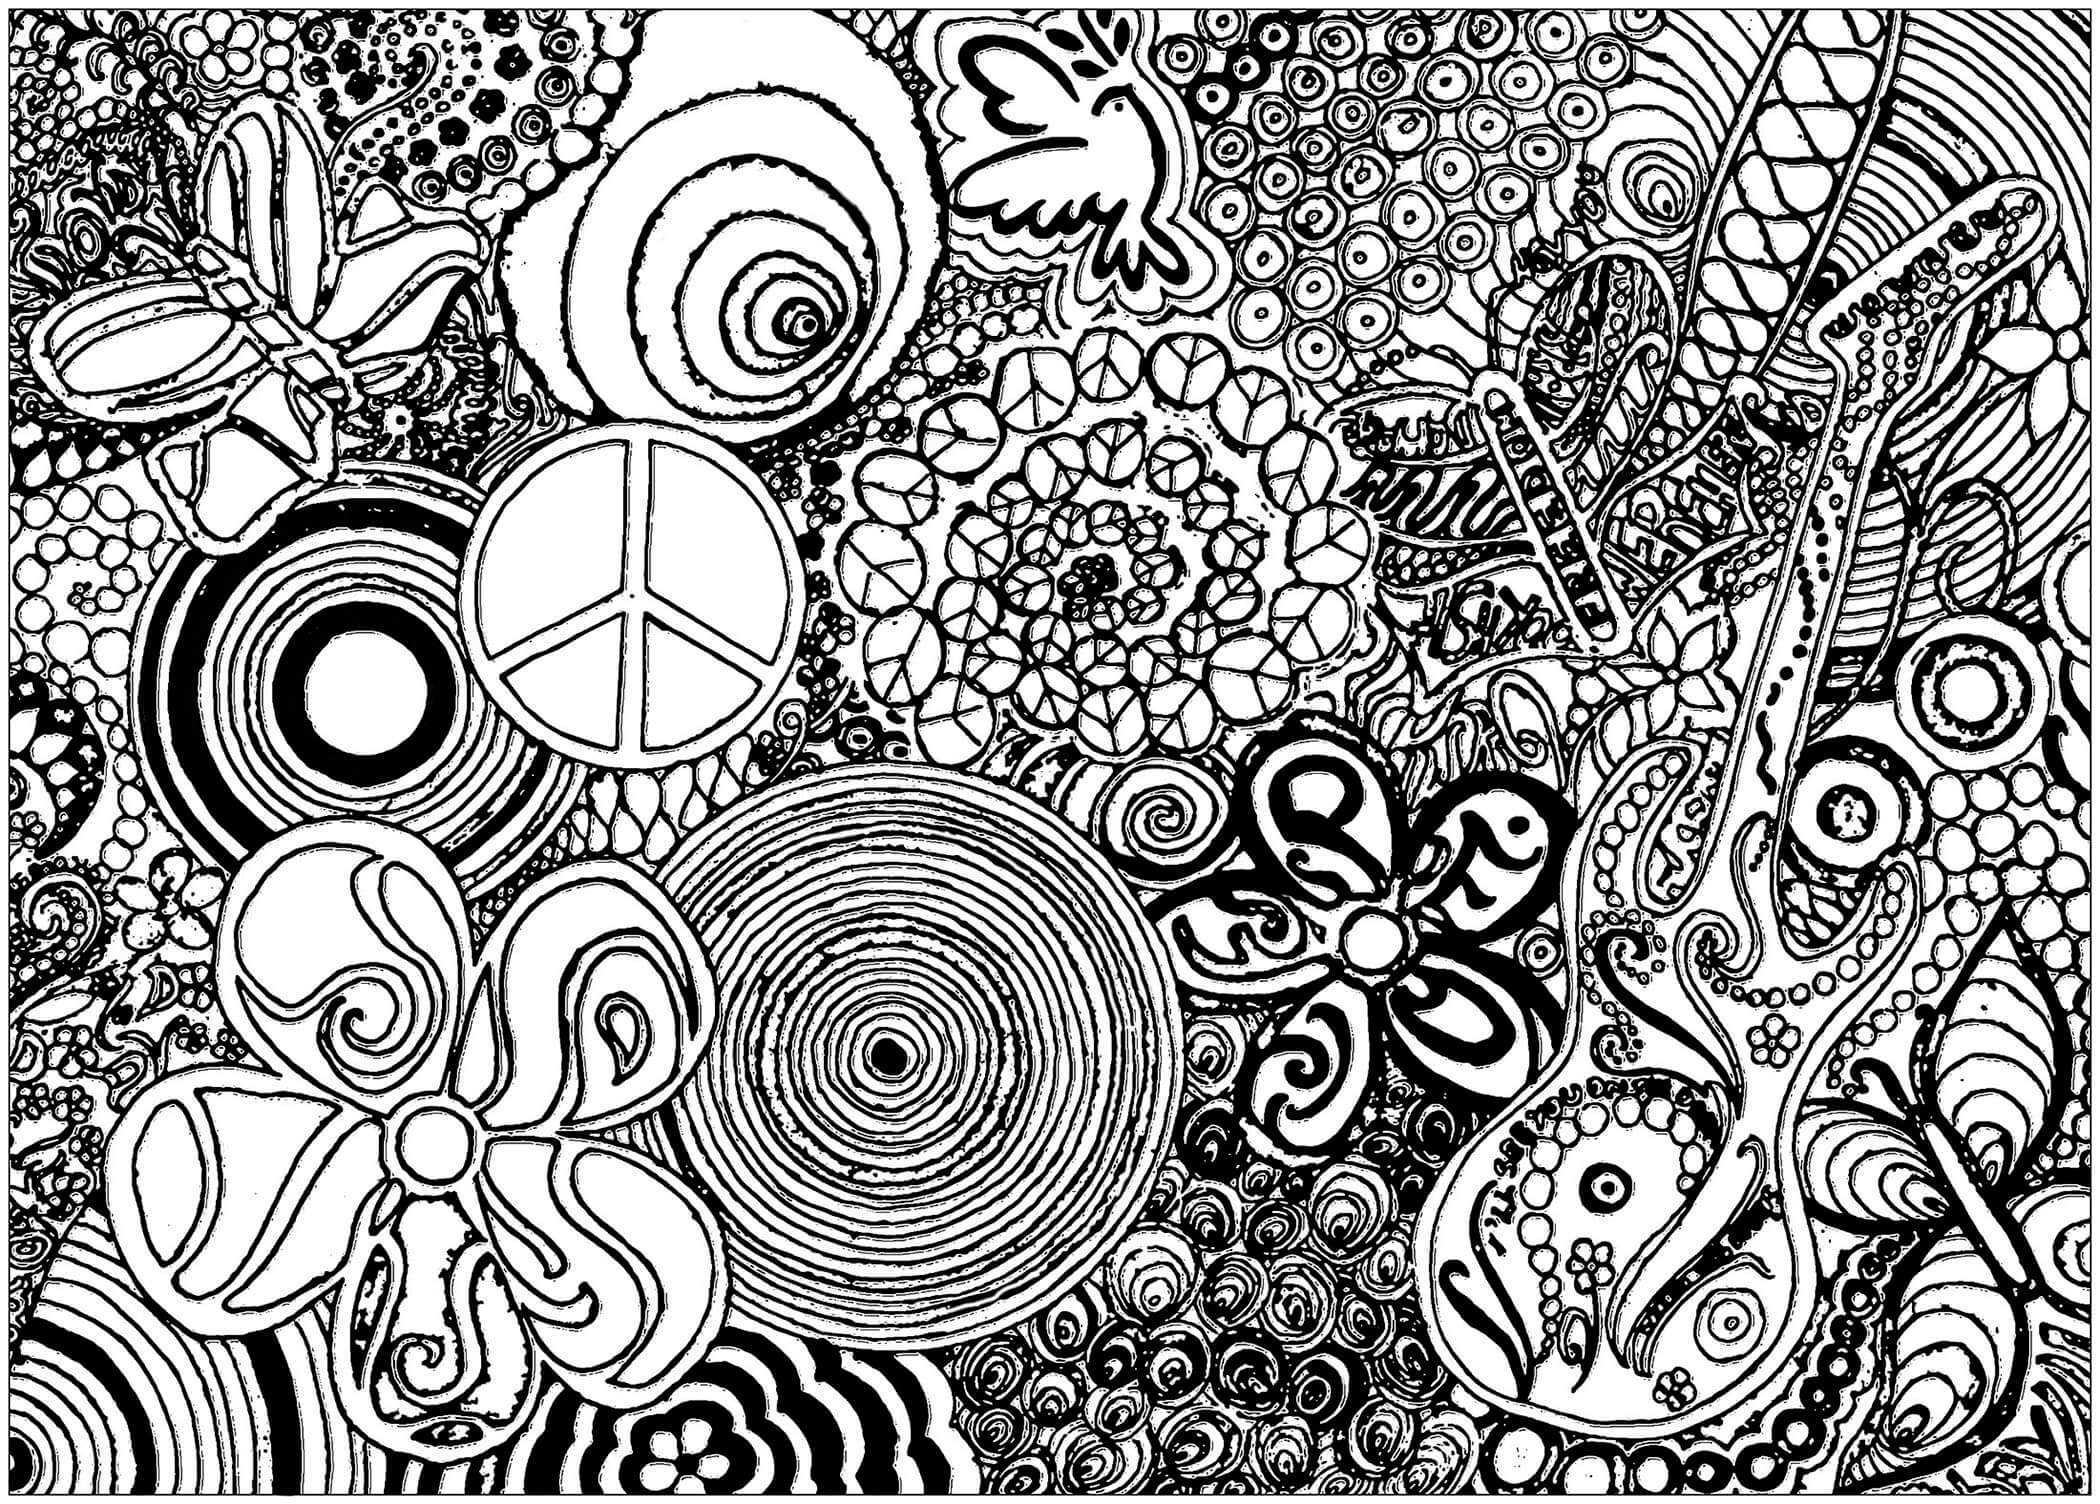 20 Trippy & Psychedelic Coloring Pages for Adults   Happier Human